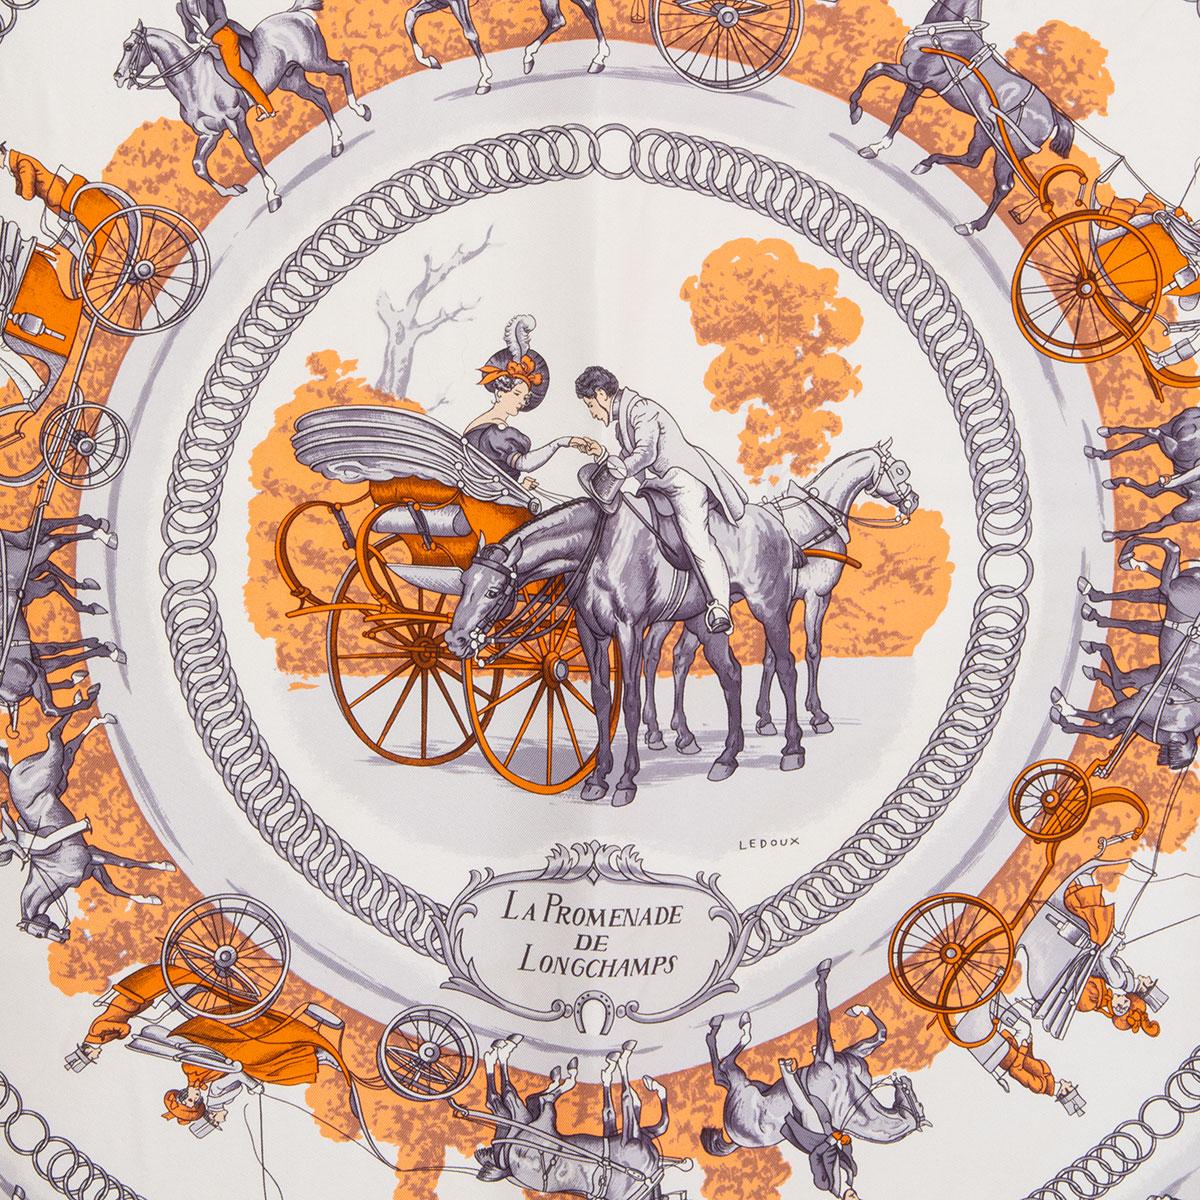 100% authentic Hermes 'La Promenade de Longchamps 90' scarf by Philippe Ledoux orange silk twill (100%) with details white and grey. Has been worn and is in excellent condition.

Height 90cm (35.1in)
Length 90cm (35.1in)

All our listings include